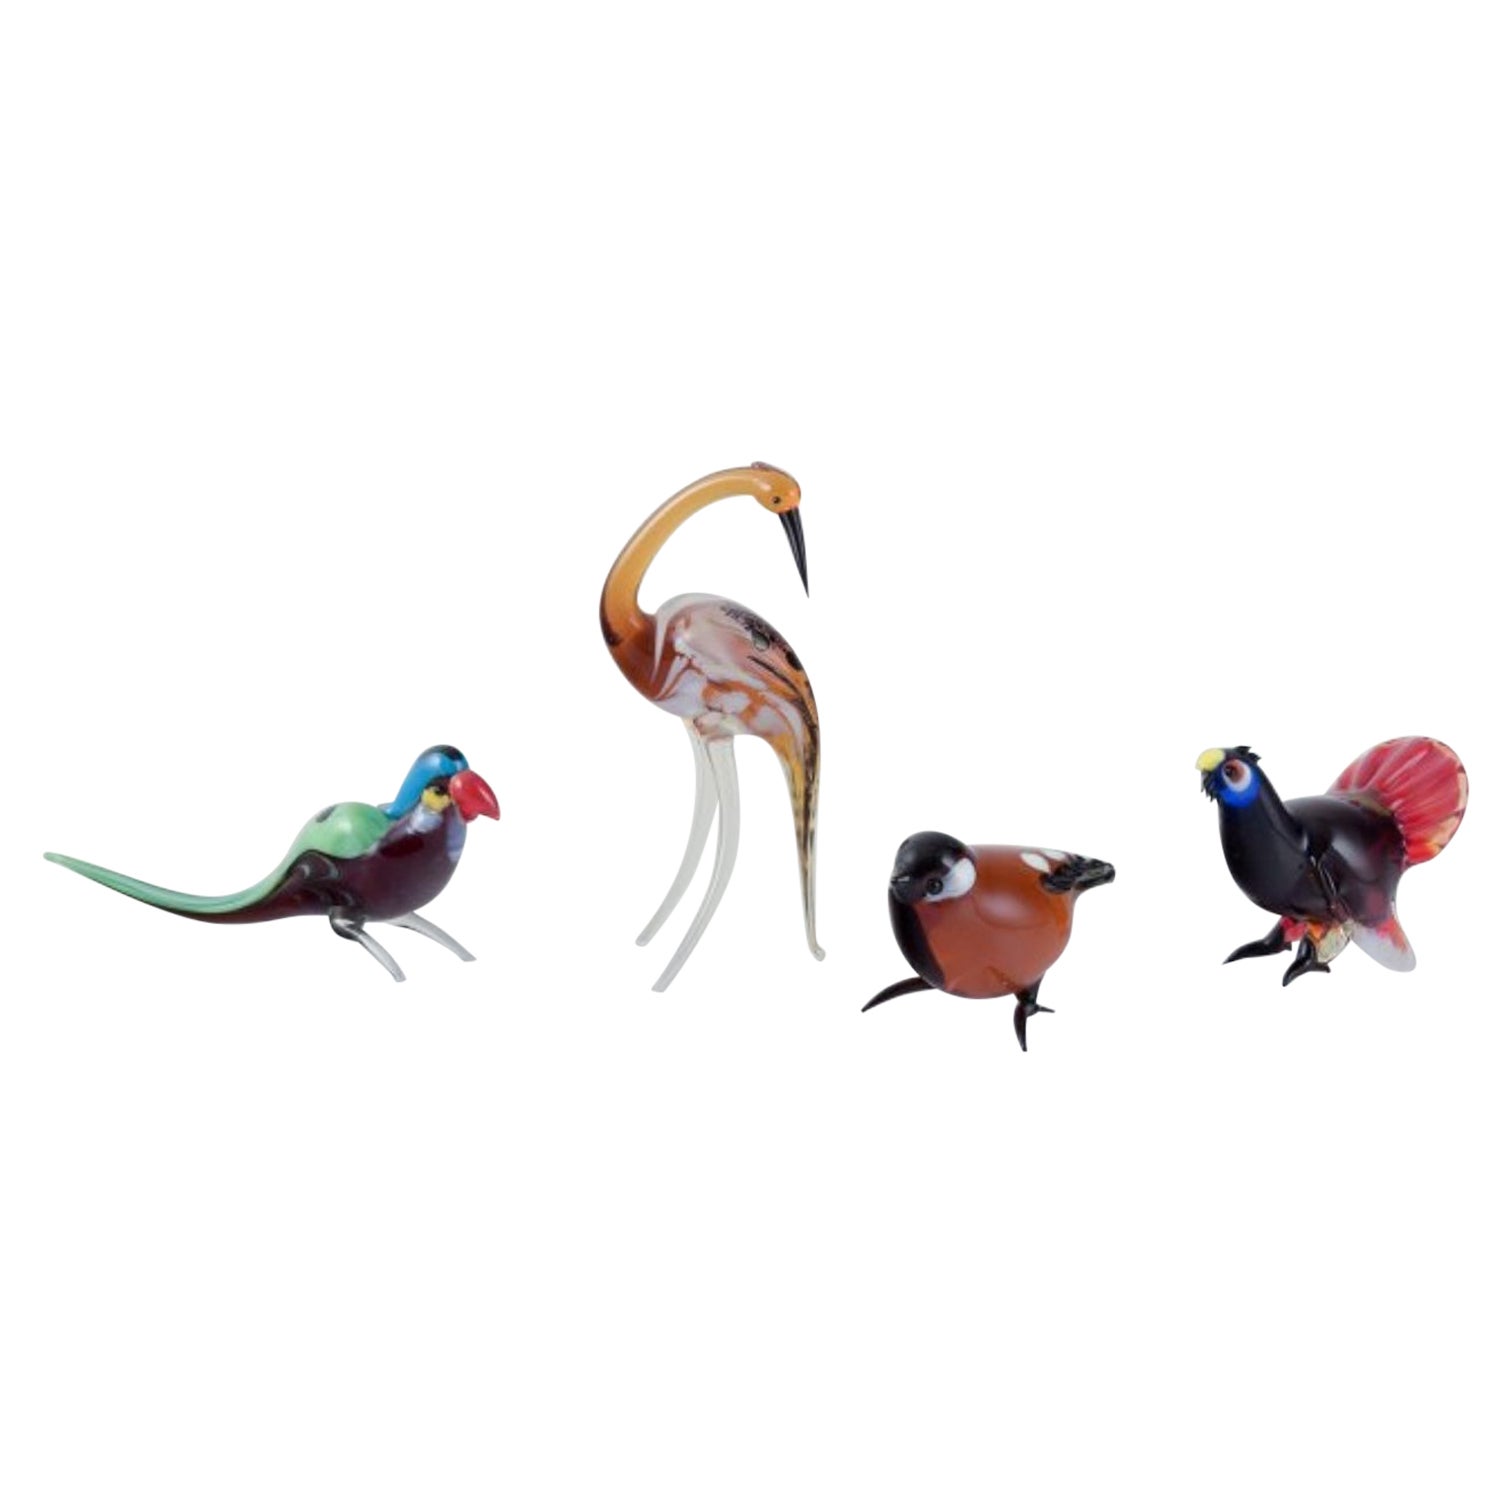 Murano, Italy. A collection of four miniature glass bird figurines. For Sale